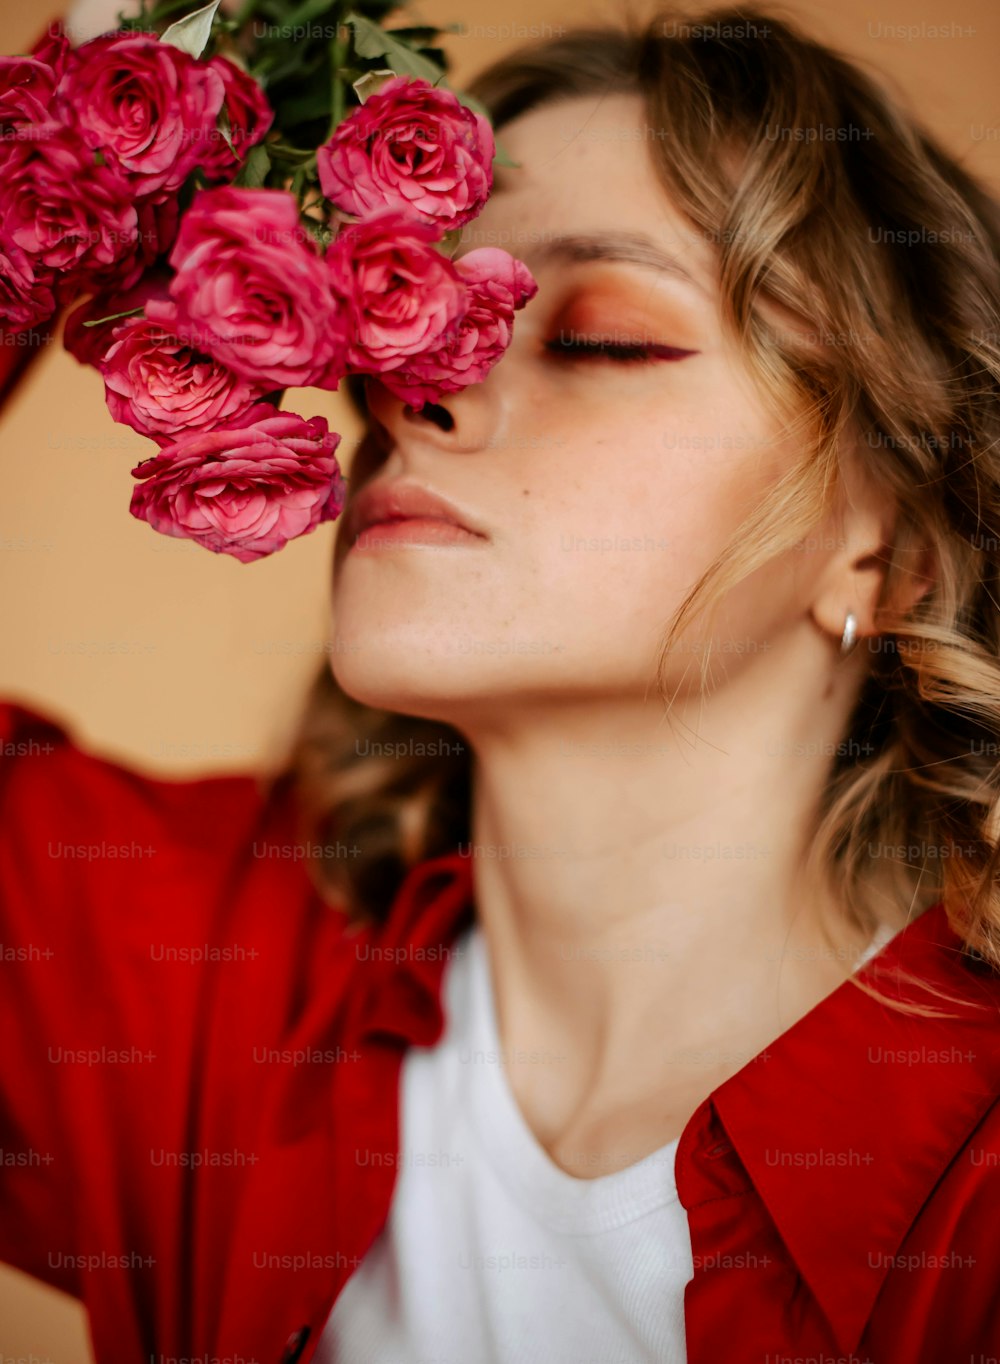 a woman holding a bunch of pink flowers over her face